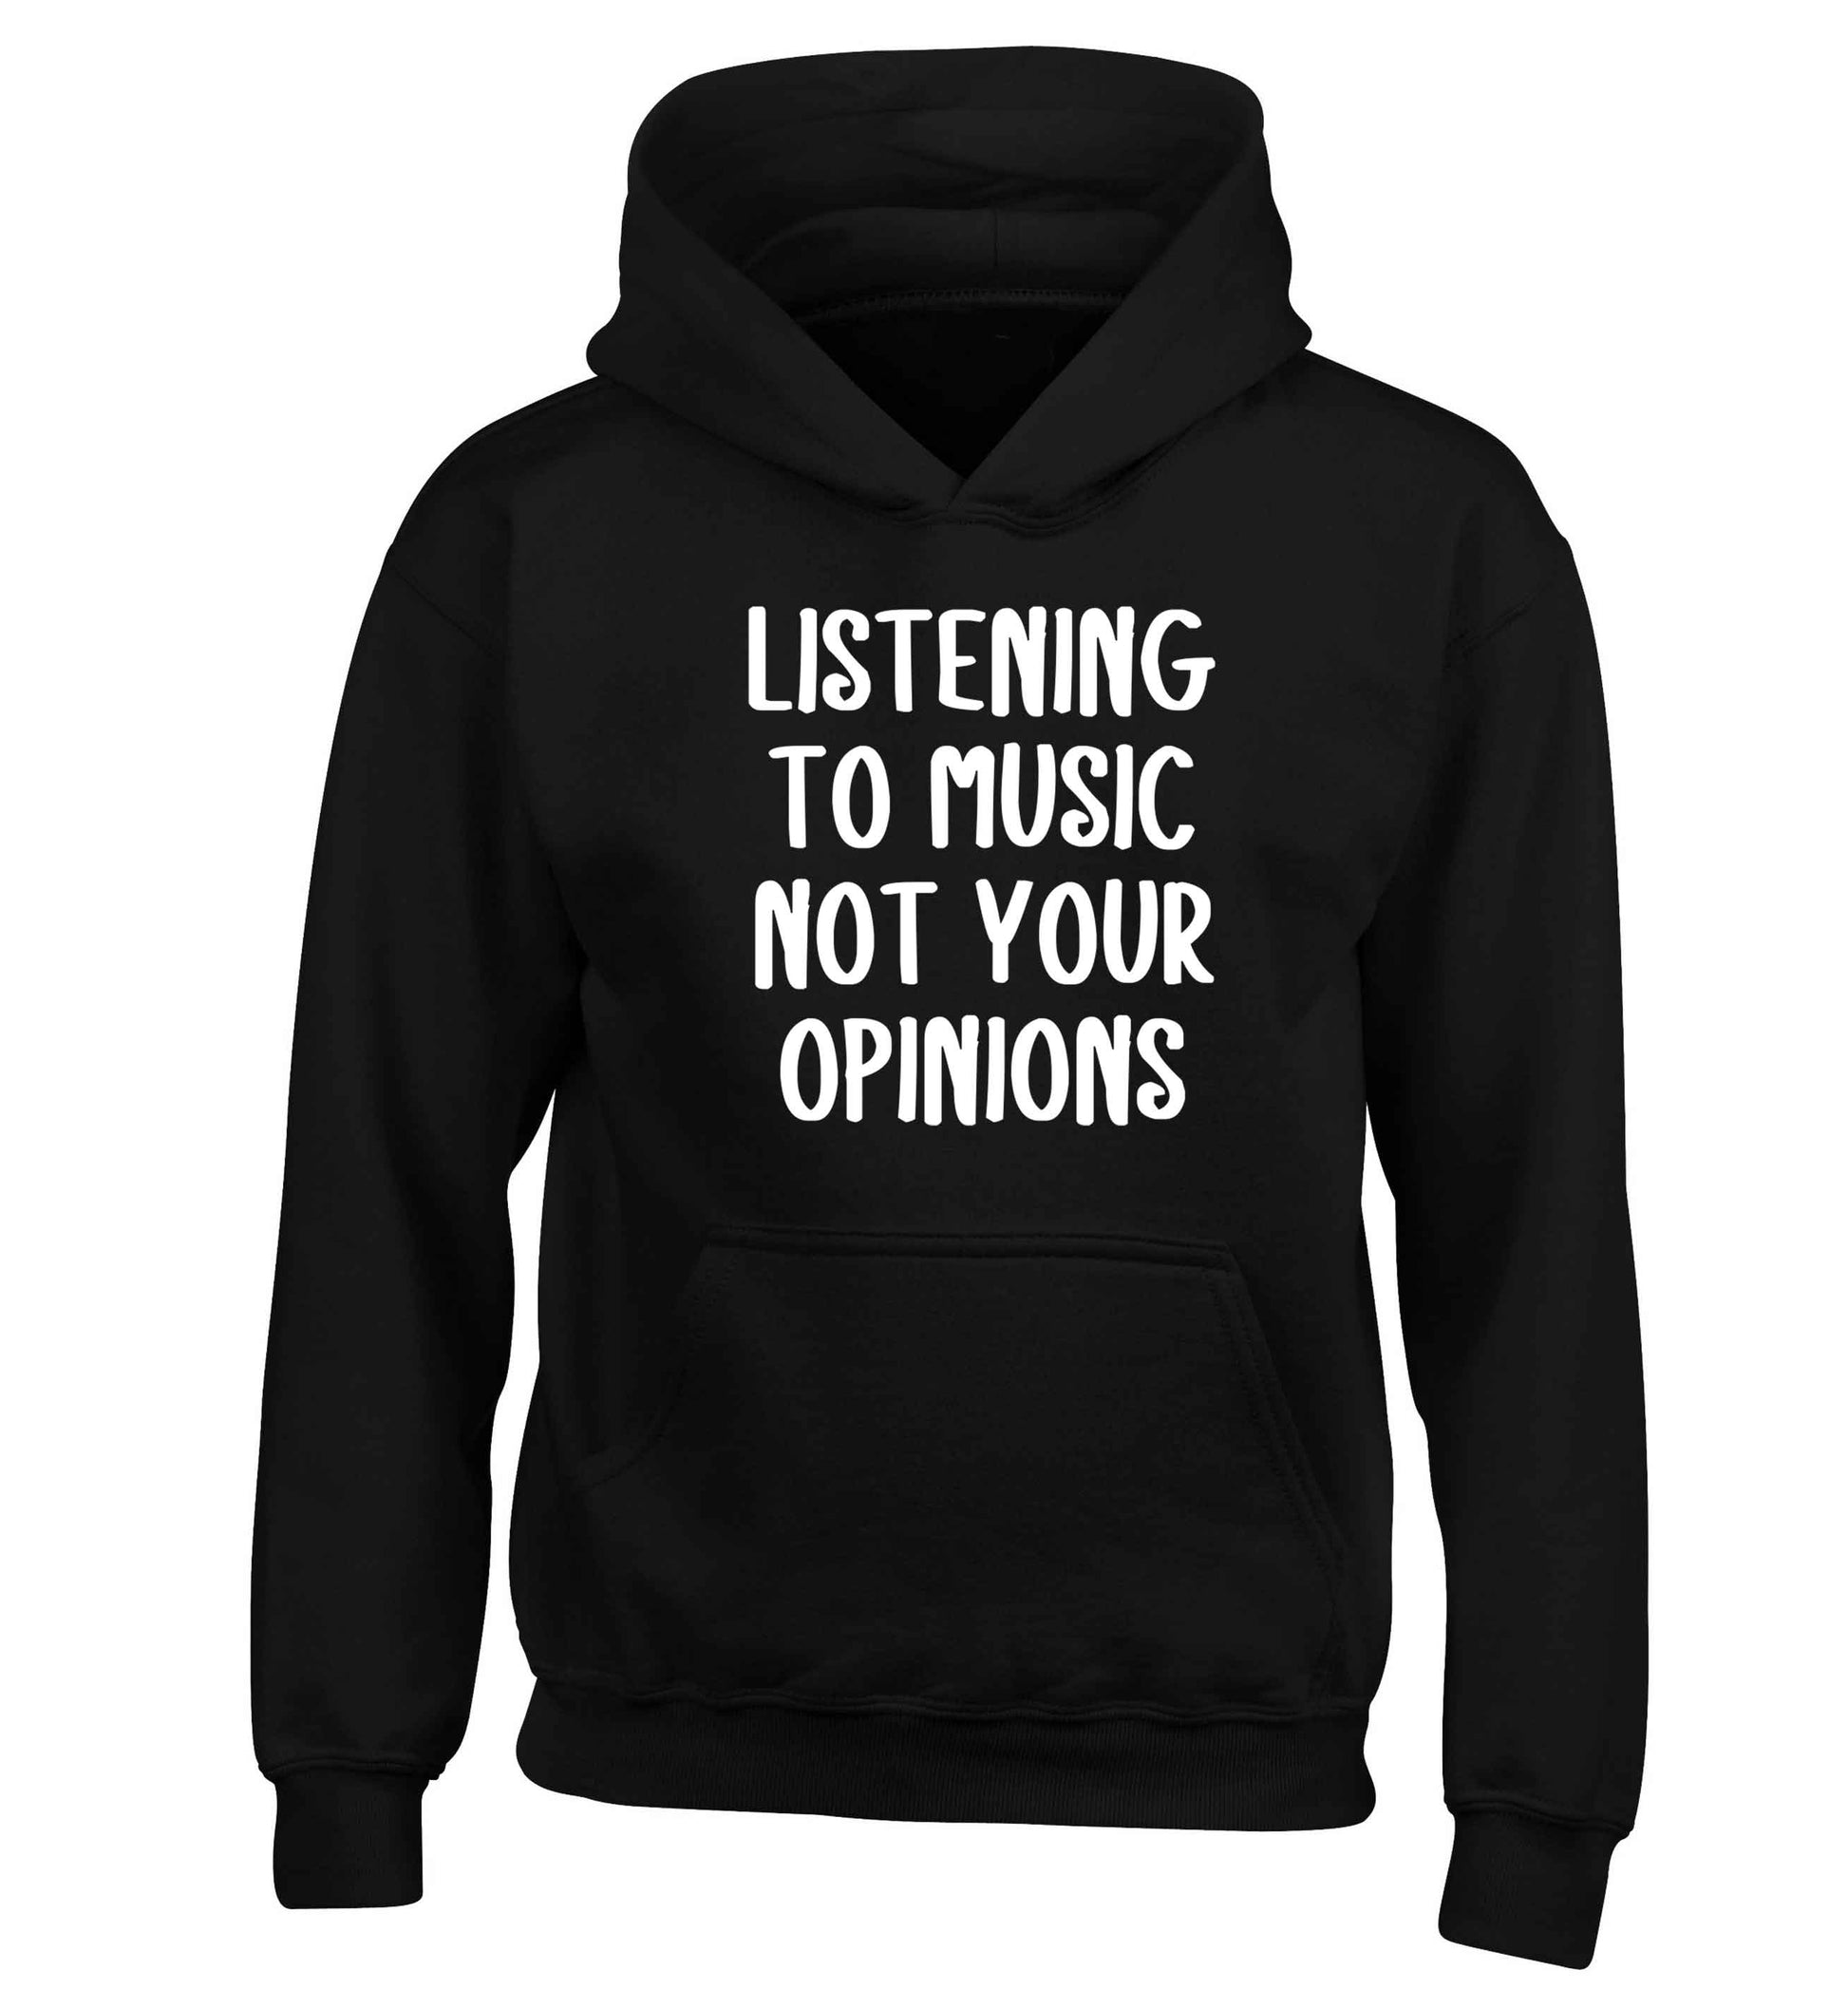 Listening to music not your opinions children's black hoodie 12-13 Years